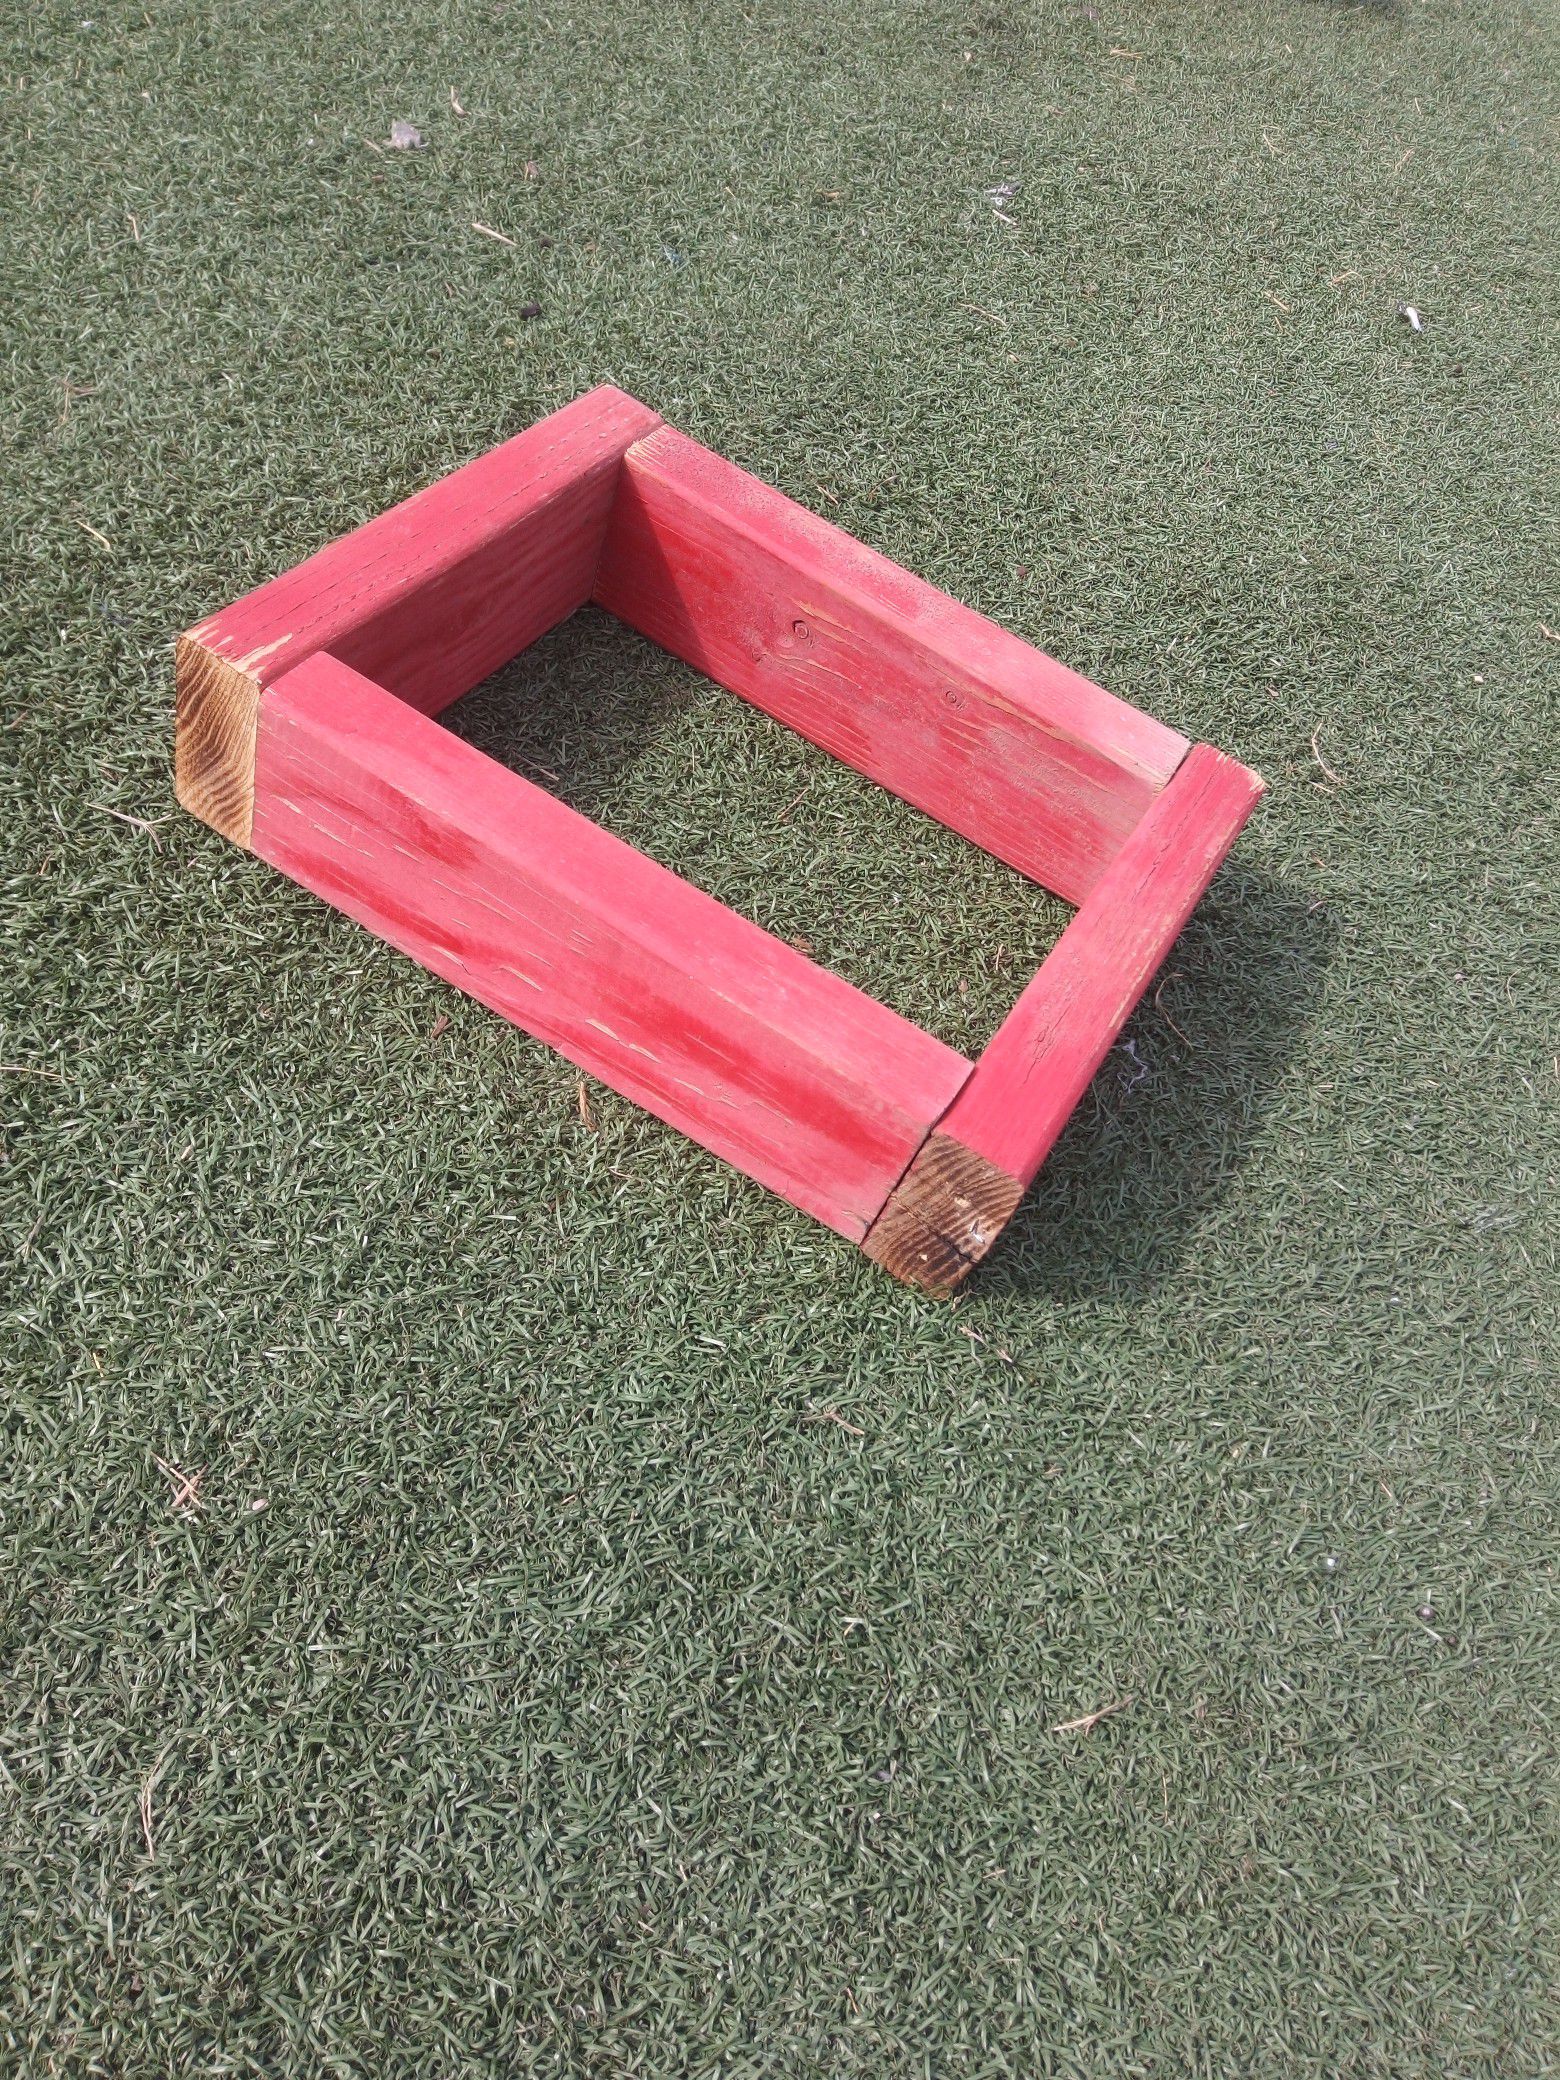 $5 MUST PICK UP 73RD AVE AND INDIAN SCHOOL cute red little planter box :) or wall shelf Size is 14 in by 10 and 1/2 in